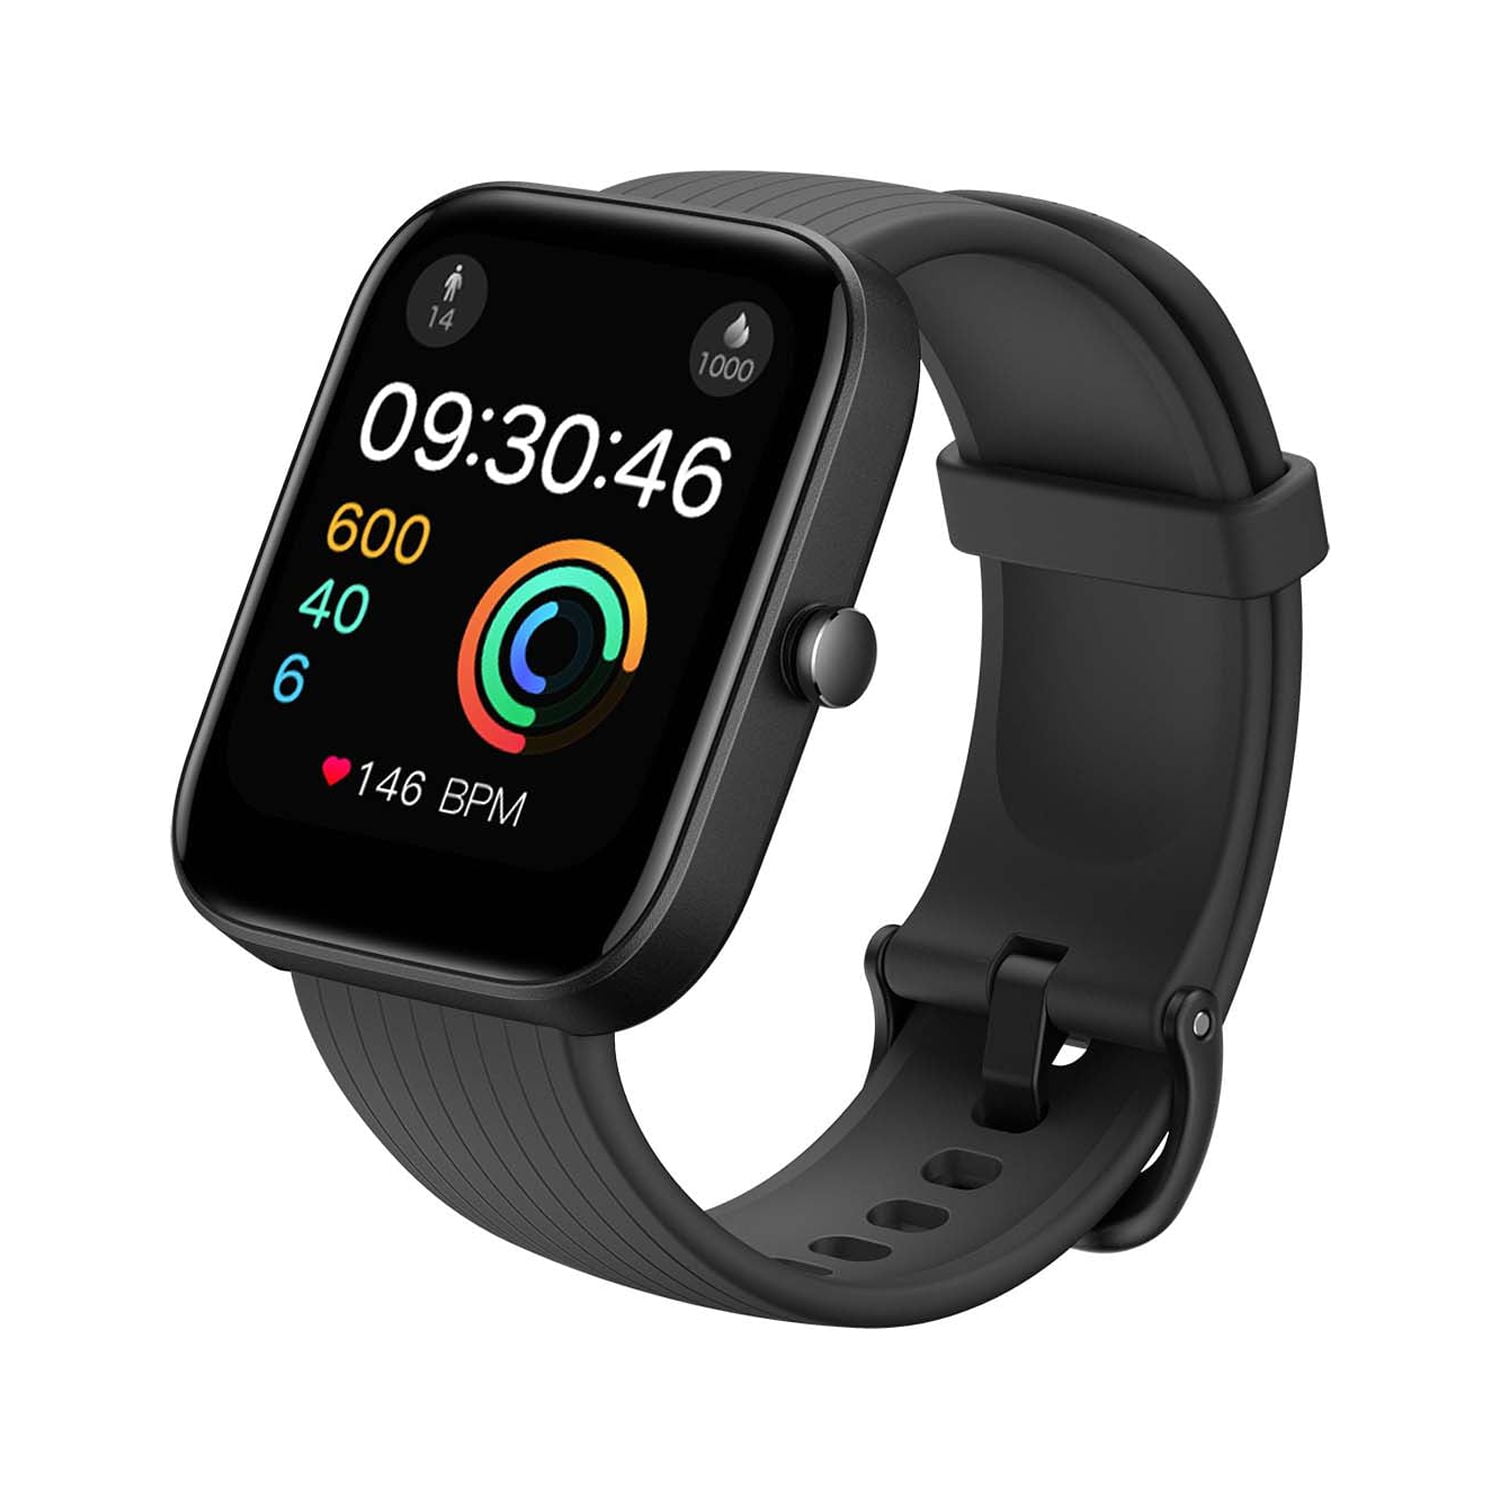 Amazfit Bip 3 Urban Edition Smart Watch: Health & Fitness Tracker w/ 1.69" Large Color Display, 14-Day Battery Life & 60+ Sports Modes $35 + Free Shipping